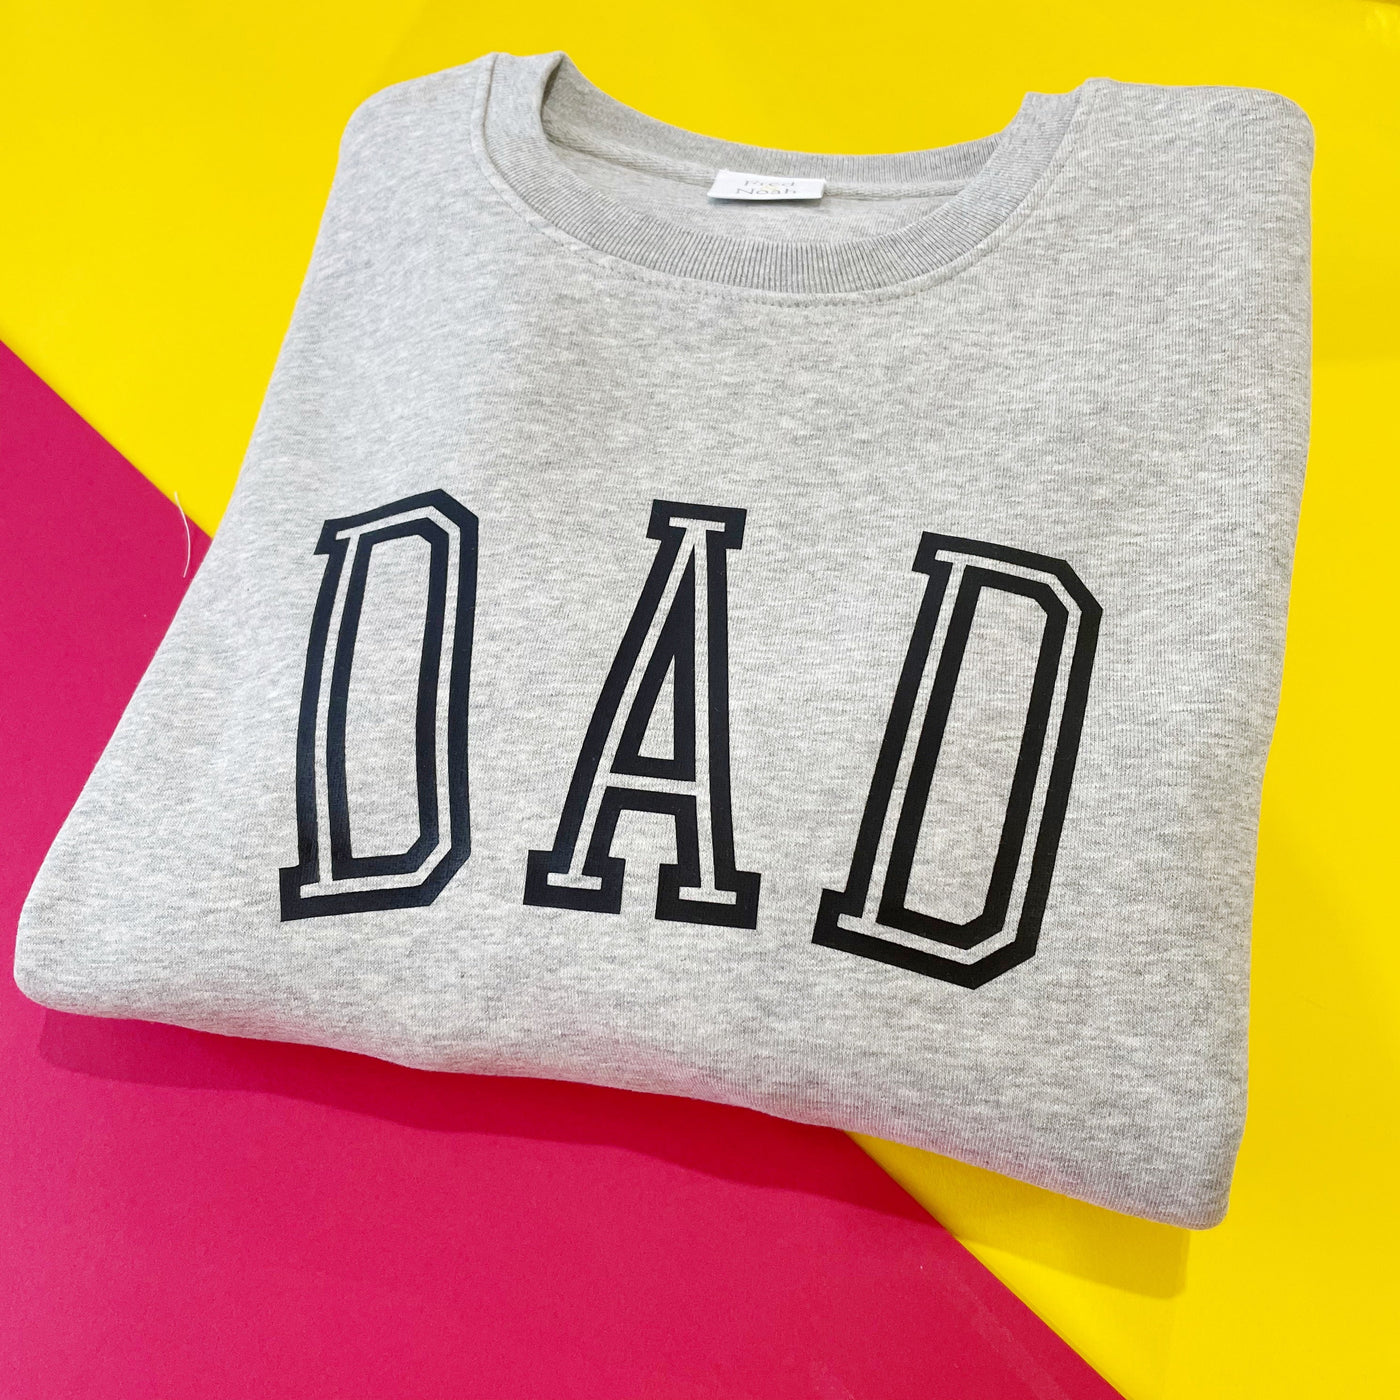 Adult Daddy Est. Navy Sweater-Adult Jumpers-Fred & Noah-Yes Bebe